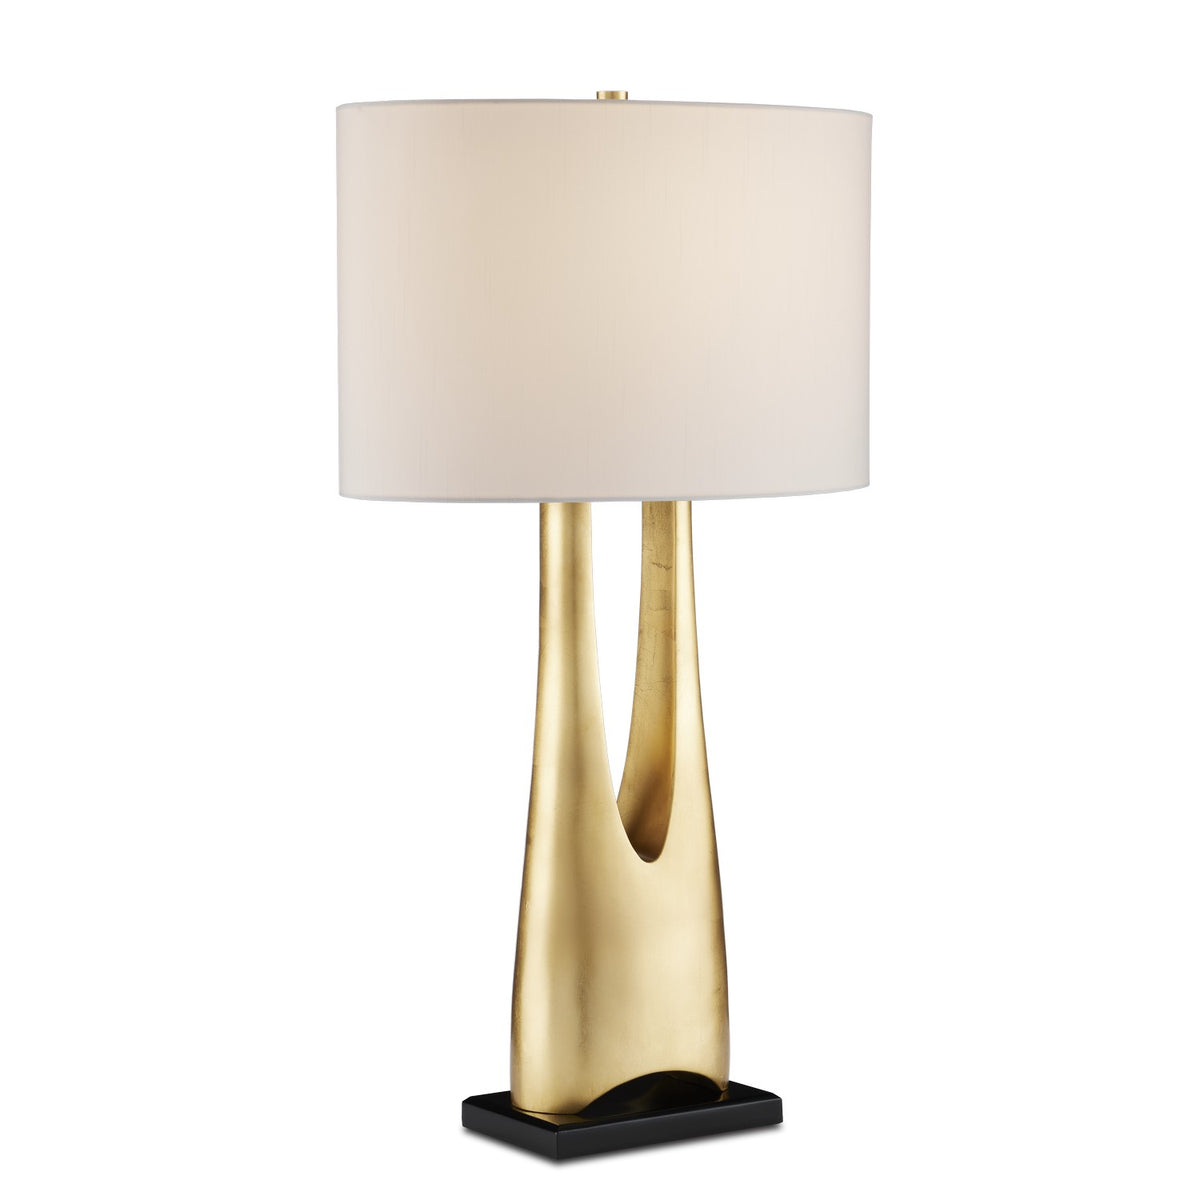 Currey and Company One Light Table Lamp from the La Porta collection in Contemporary Gold Leaf/Black finish